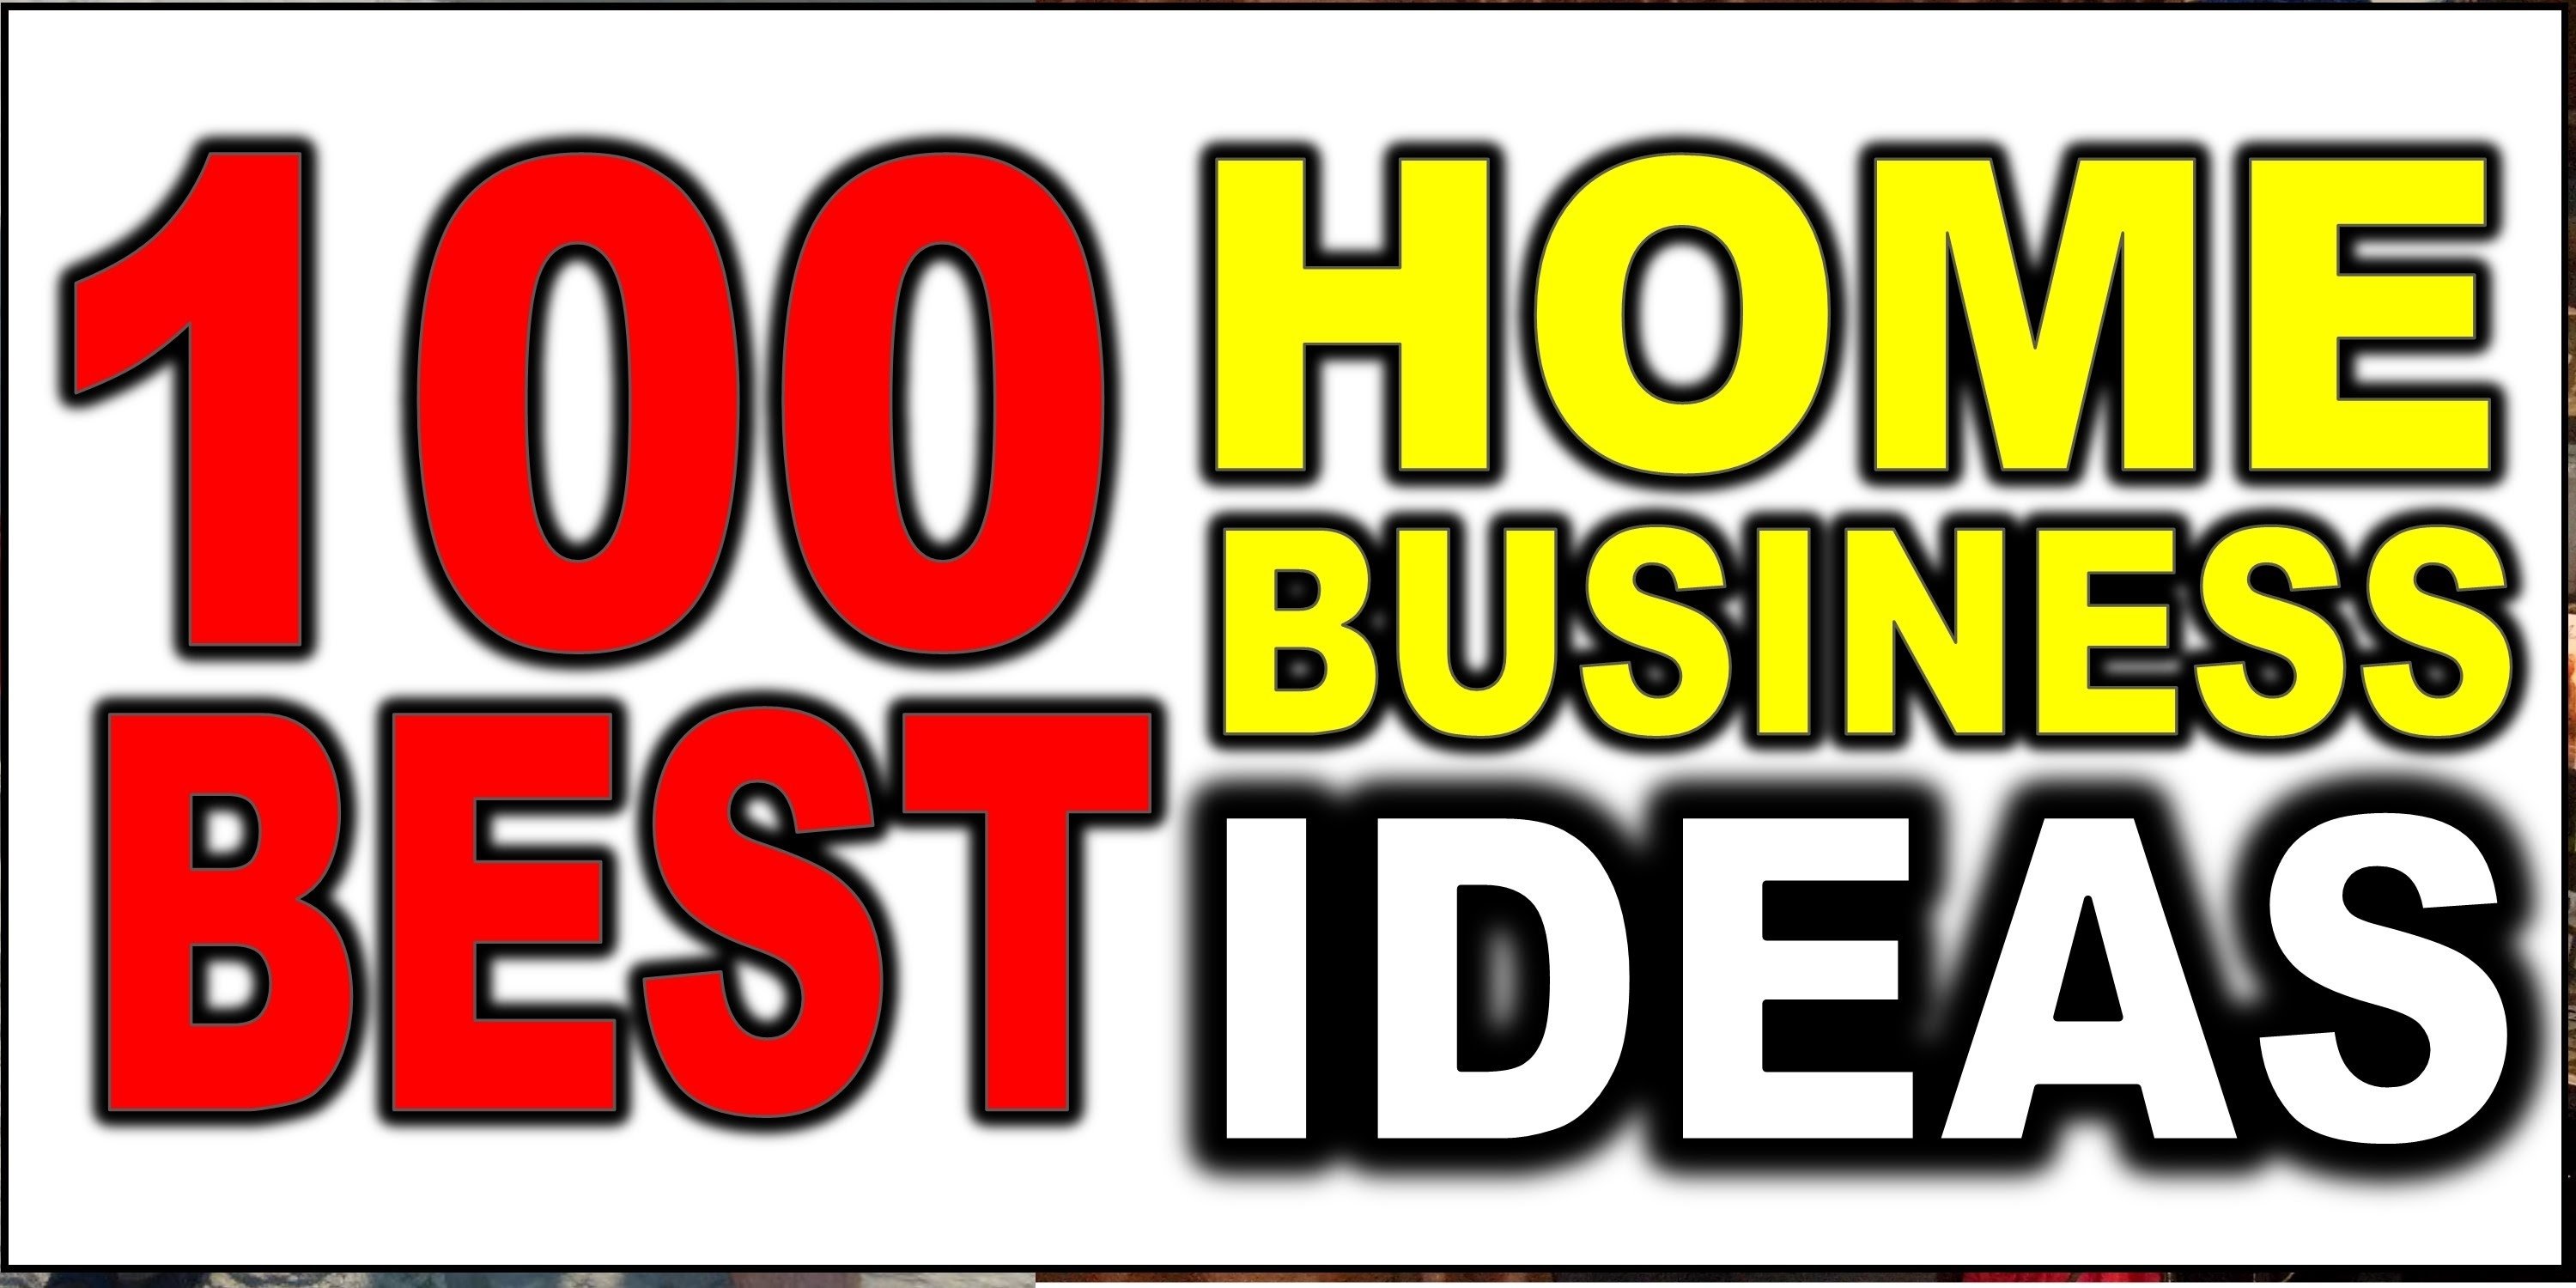 10 Ideal Top Small Business Ideas 2013 vibrant starting own business ideas at home based 2013 click image 6 2022